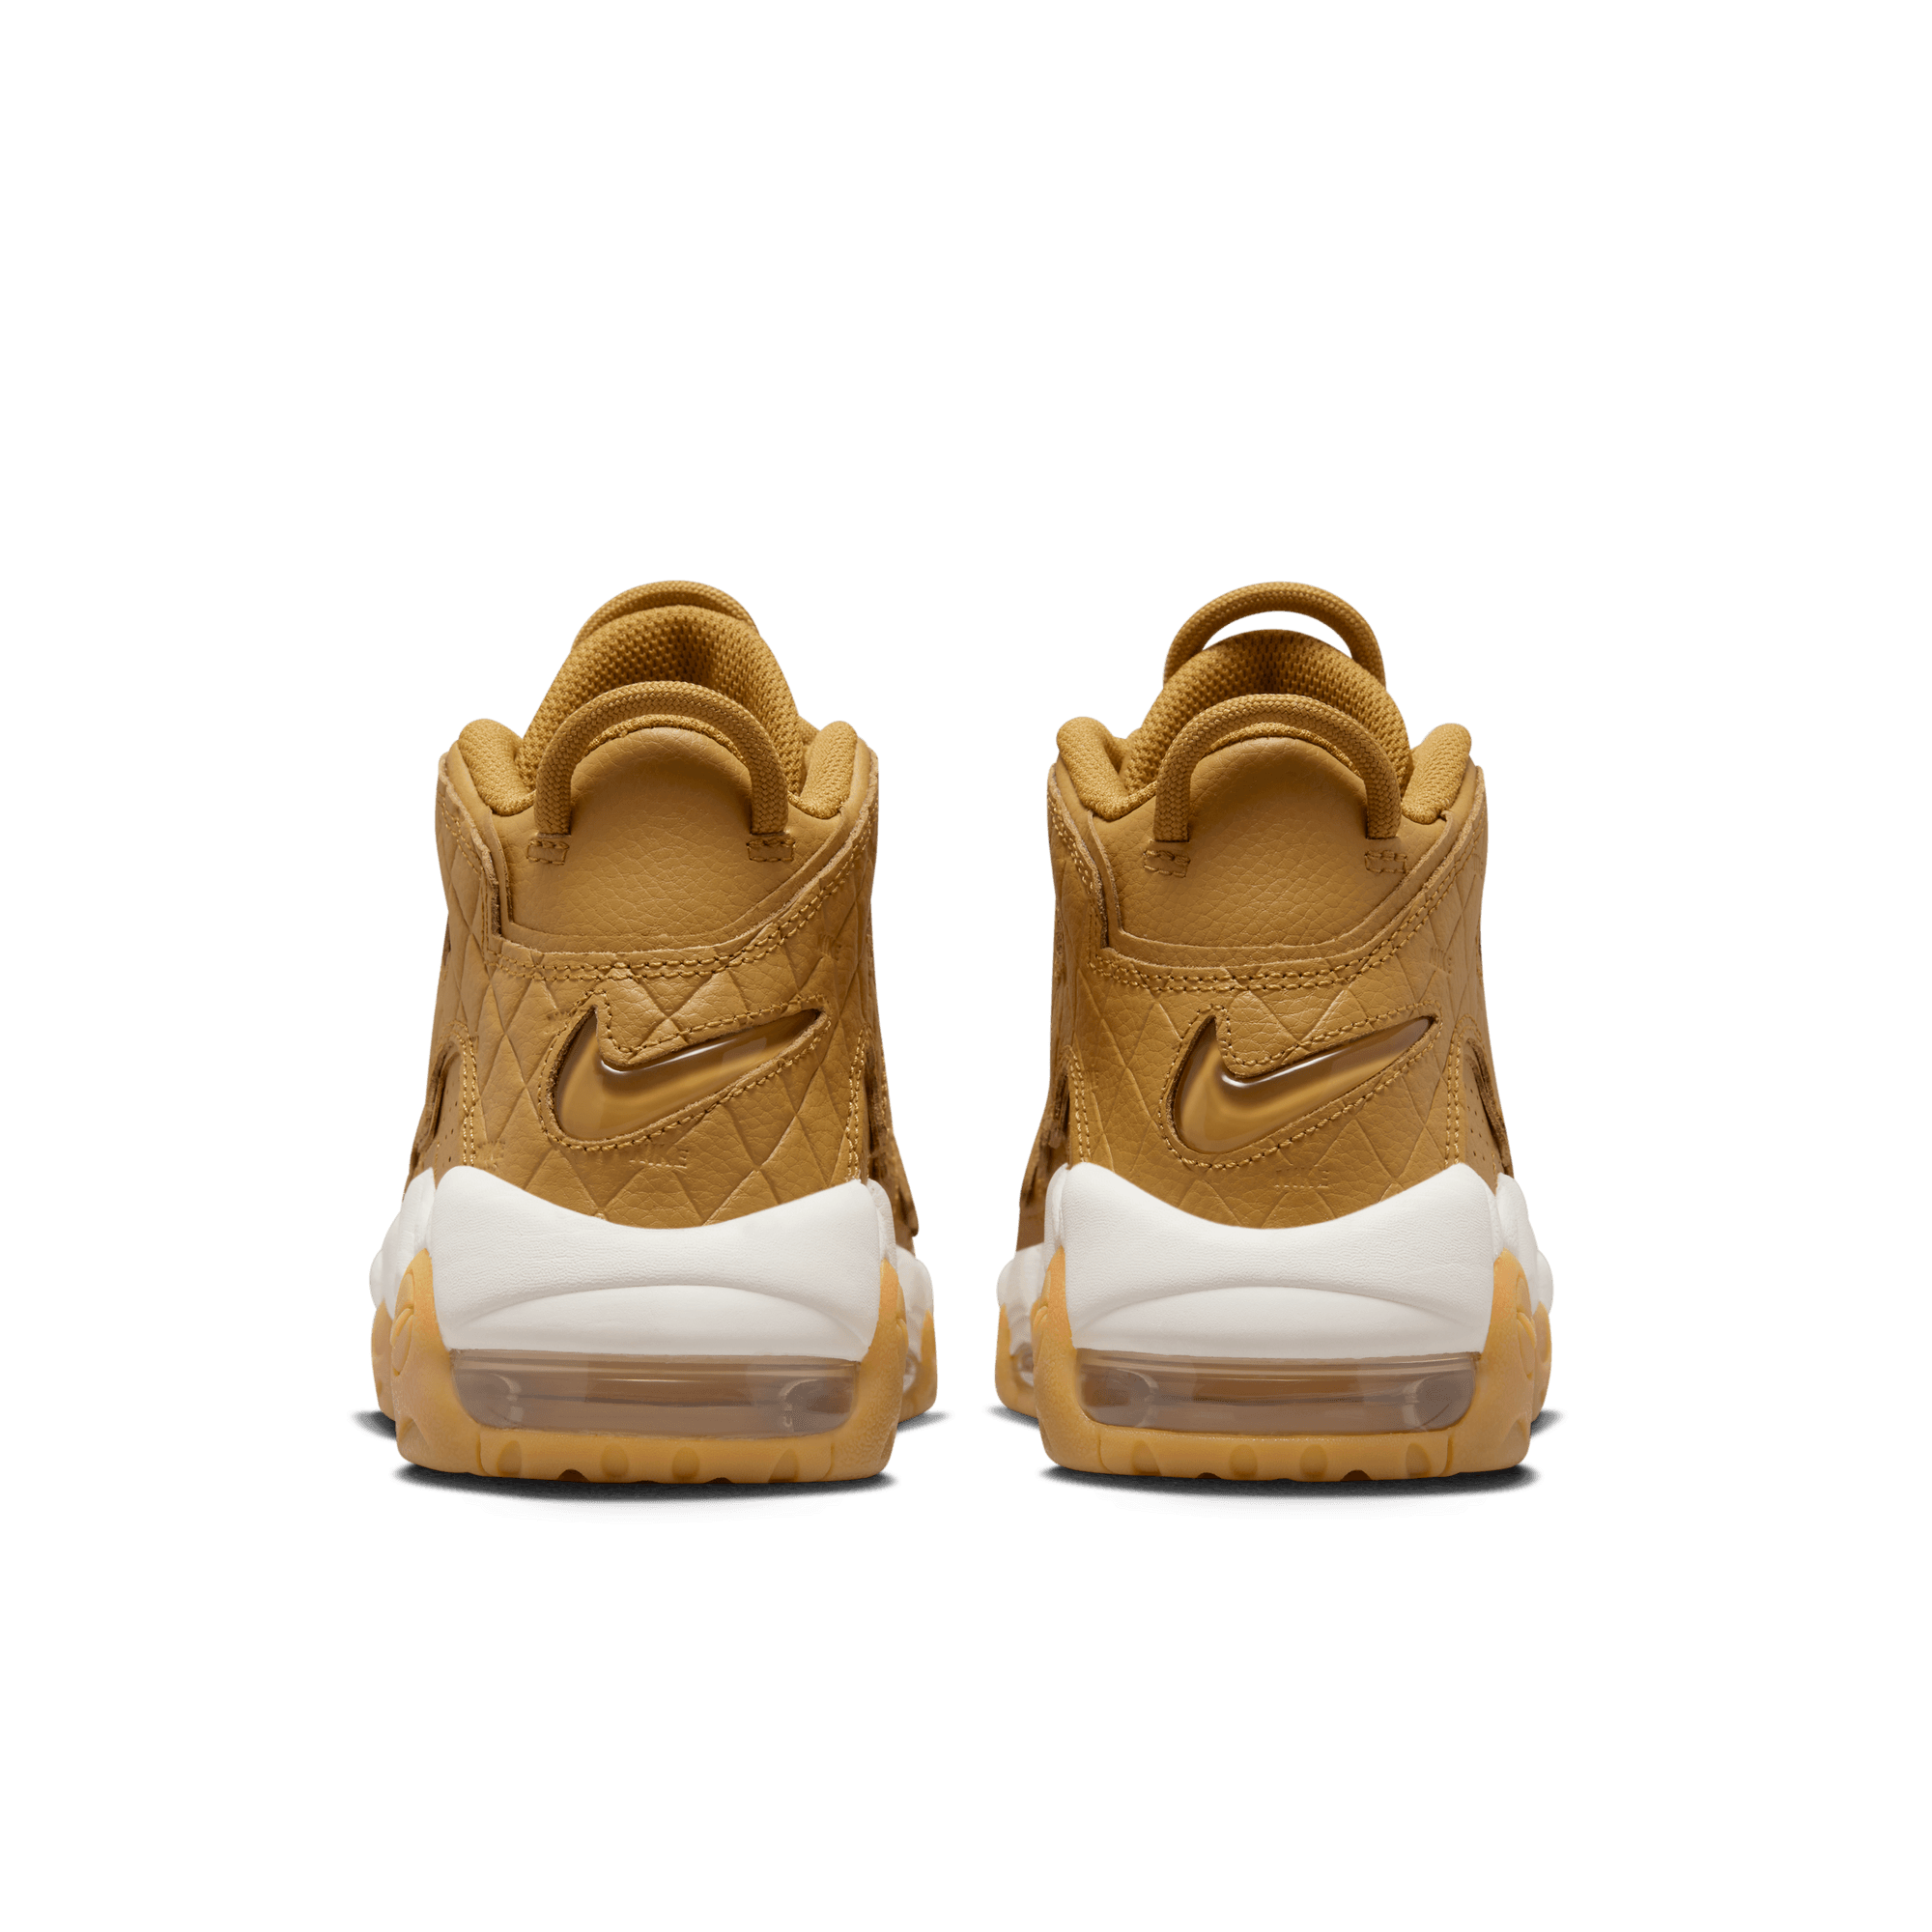 WMNS AIR MORE UPTEMPO '96 "QUILTED WHEAT"